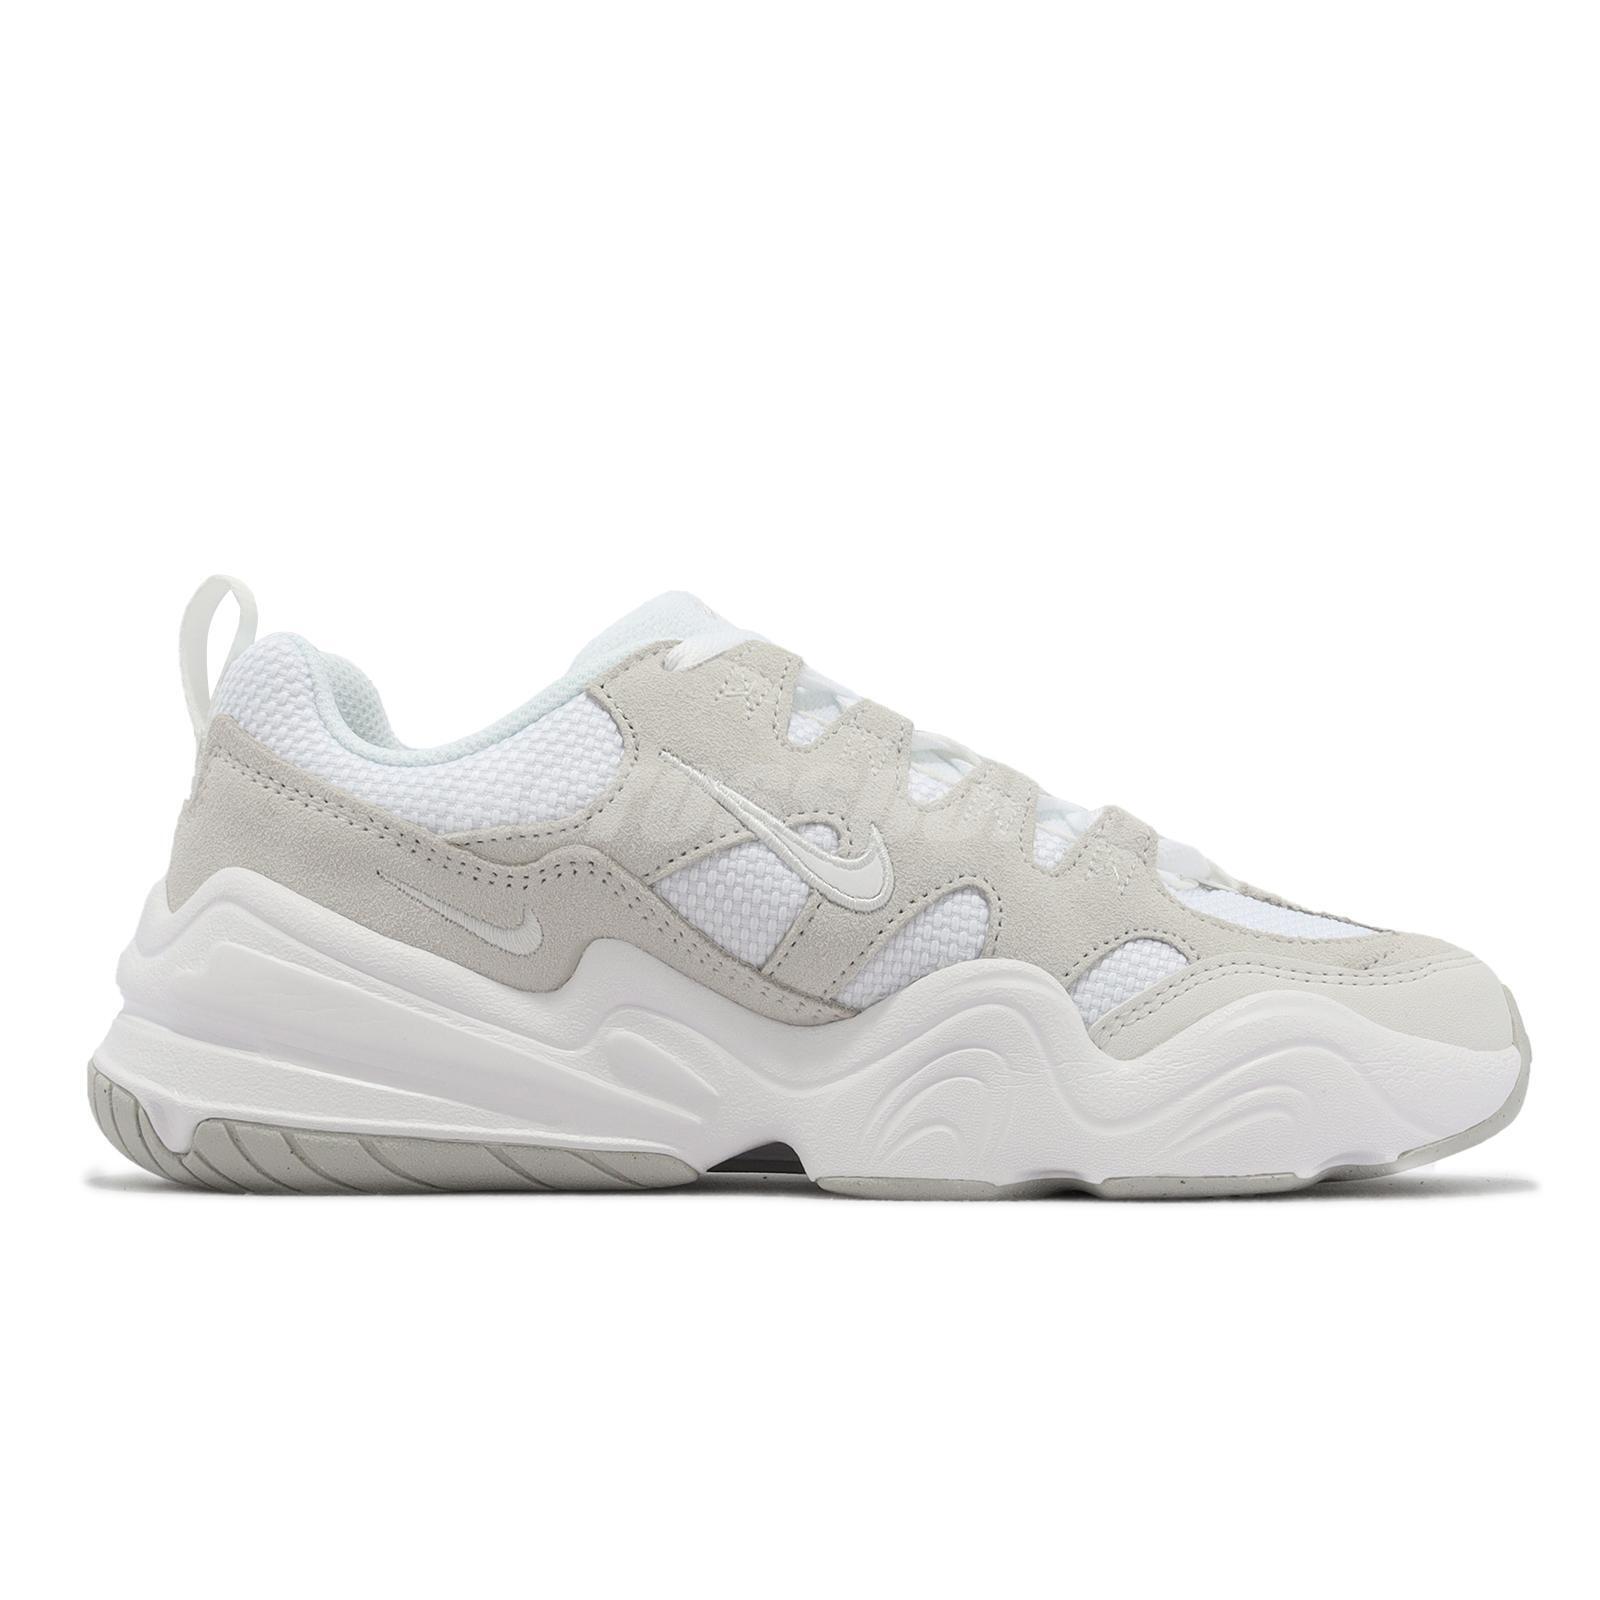 Nike Tech Hera White Photon Dust Shoes DR9761-100 - Compare Football ...